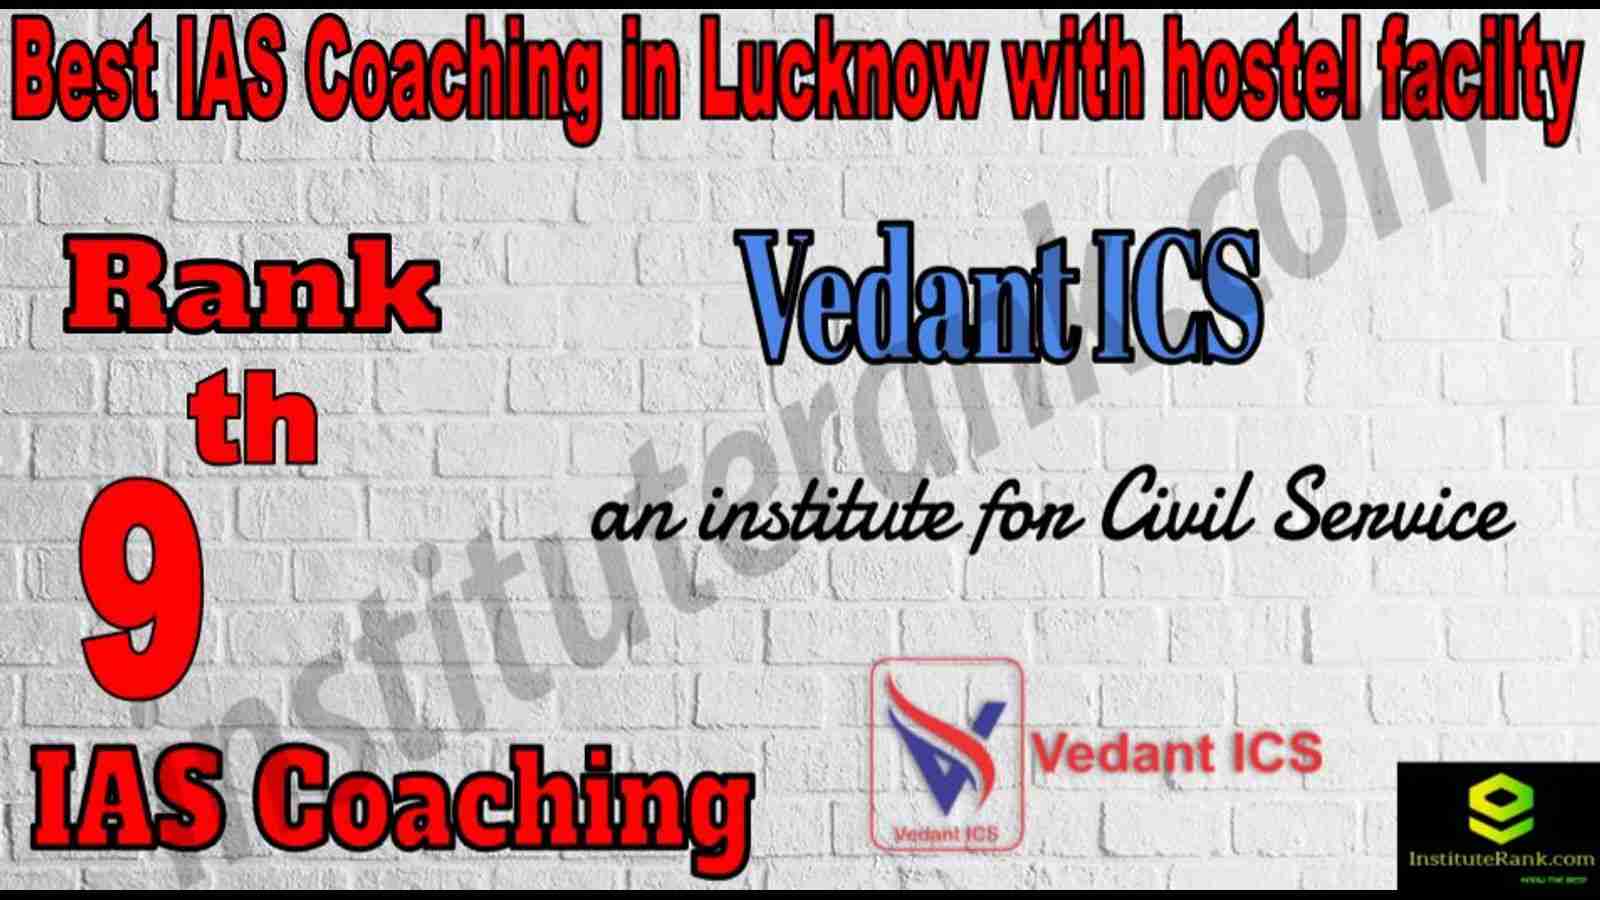 9th Best IAS Coaching in Kanpur with hostel facility 